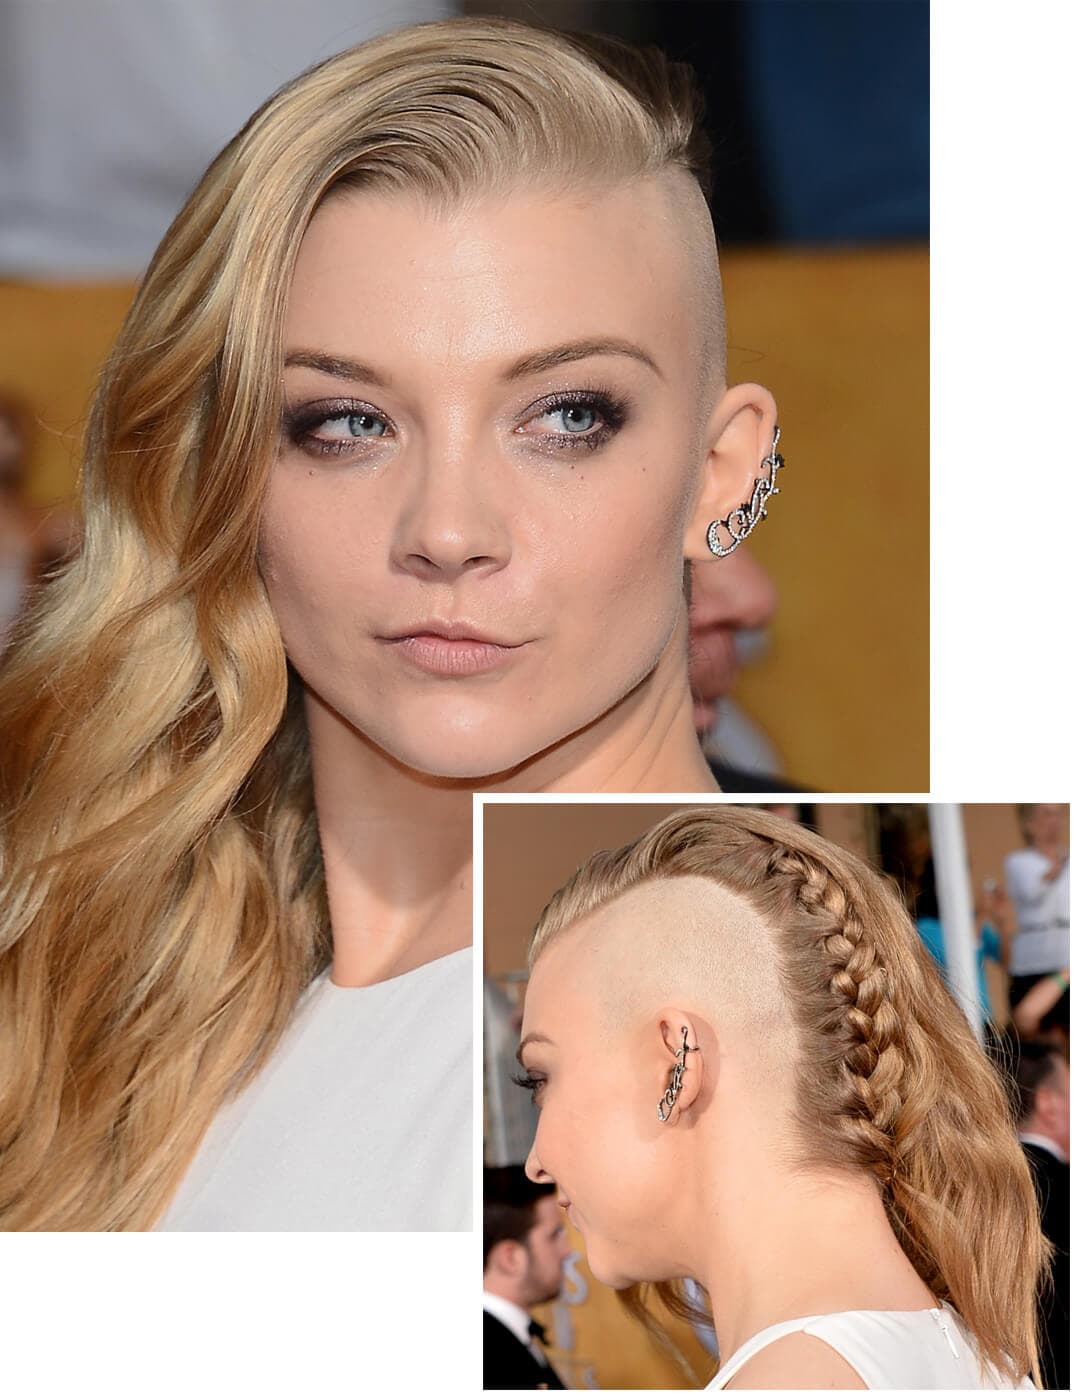 Natalie Dormer rocking an asymmetrical long hair undercut hairstyle with French braid details at the back